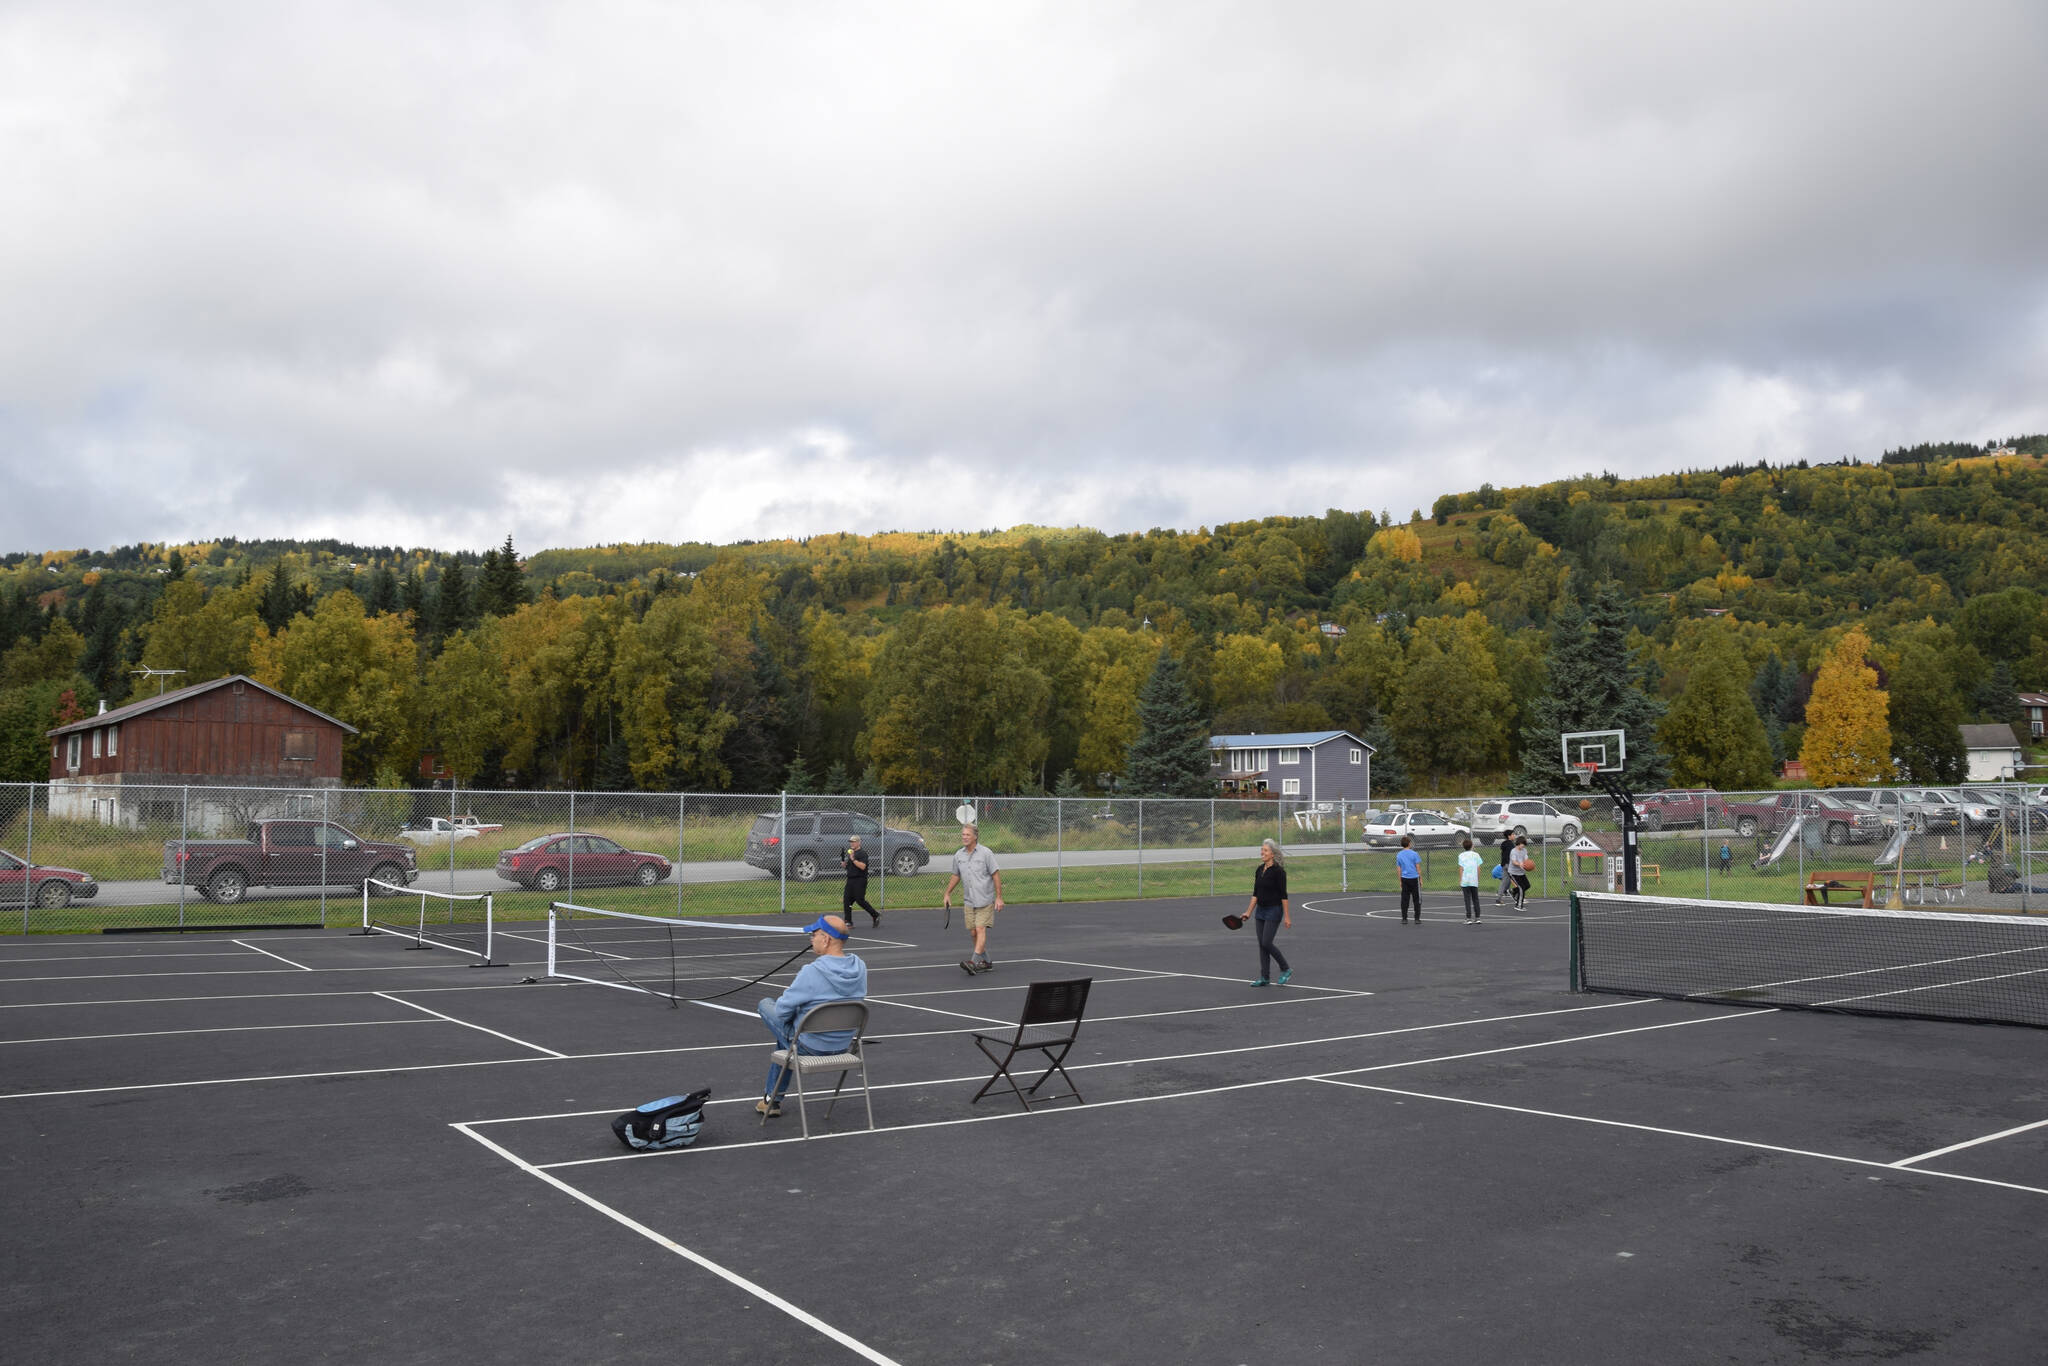 Southern Kenai Peninsula residents make use of the courts at the Kachemak City Park Grand Opening on Saturday, Sept. 17, 2022. (Photo by Charlie Menke / Homer News)